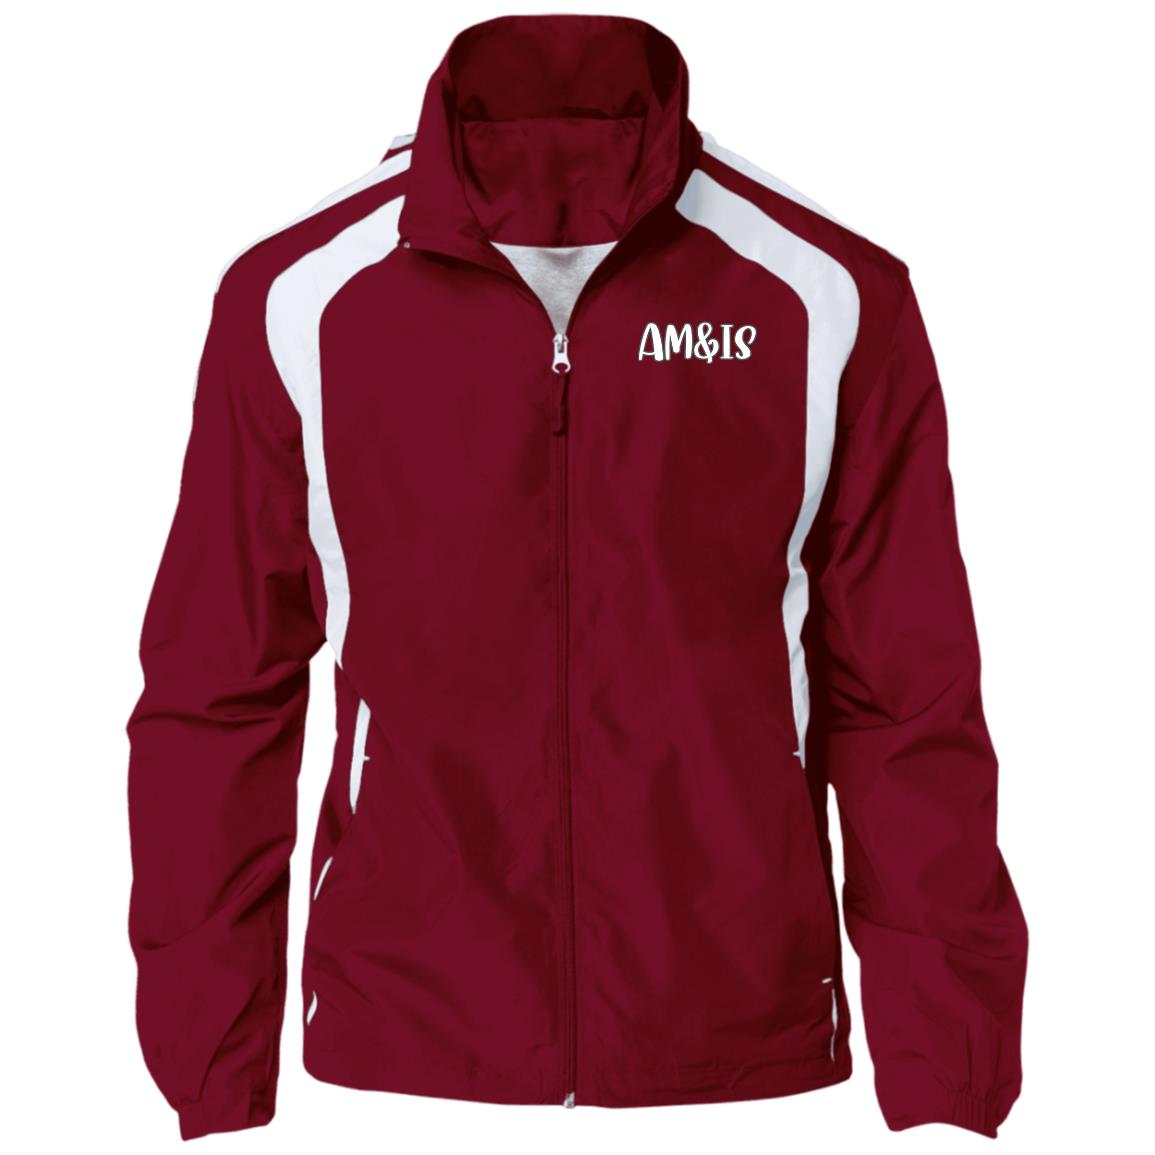 MAROON WHITE - AM&IS Activewear Jersey-Lined Raglan Jacket - mens jacket at TFC&H Co.